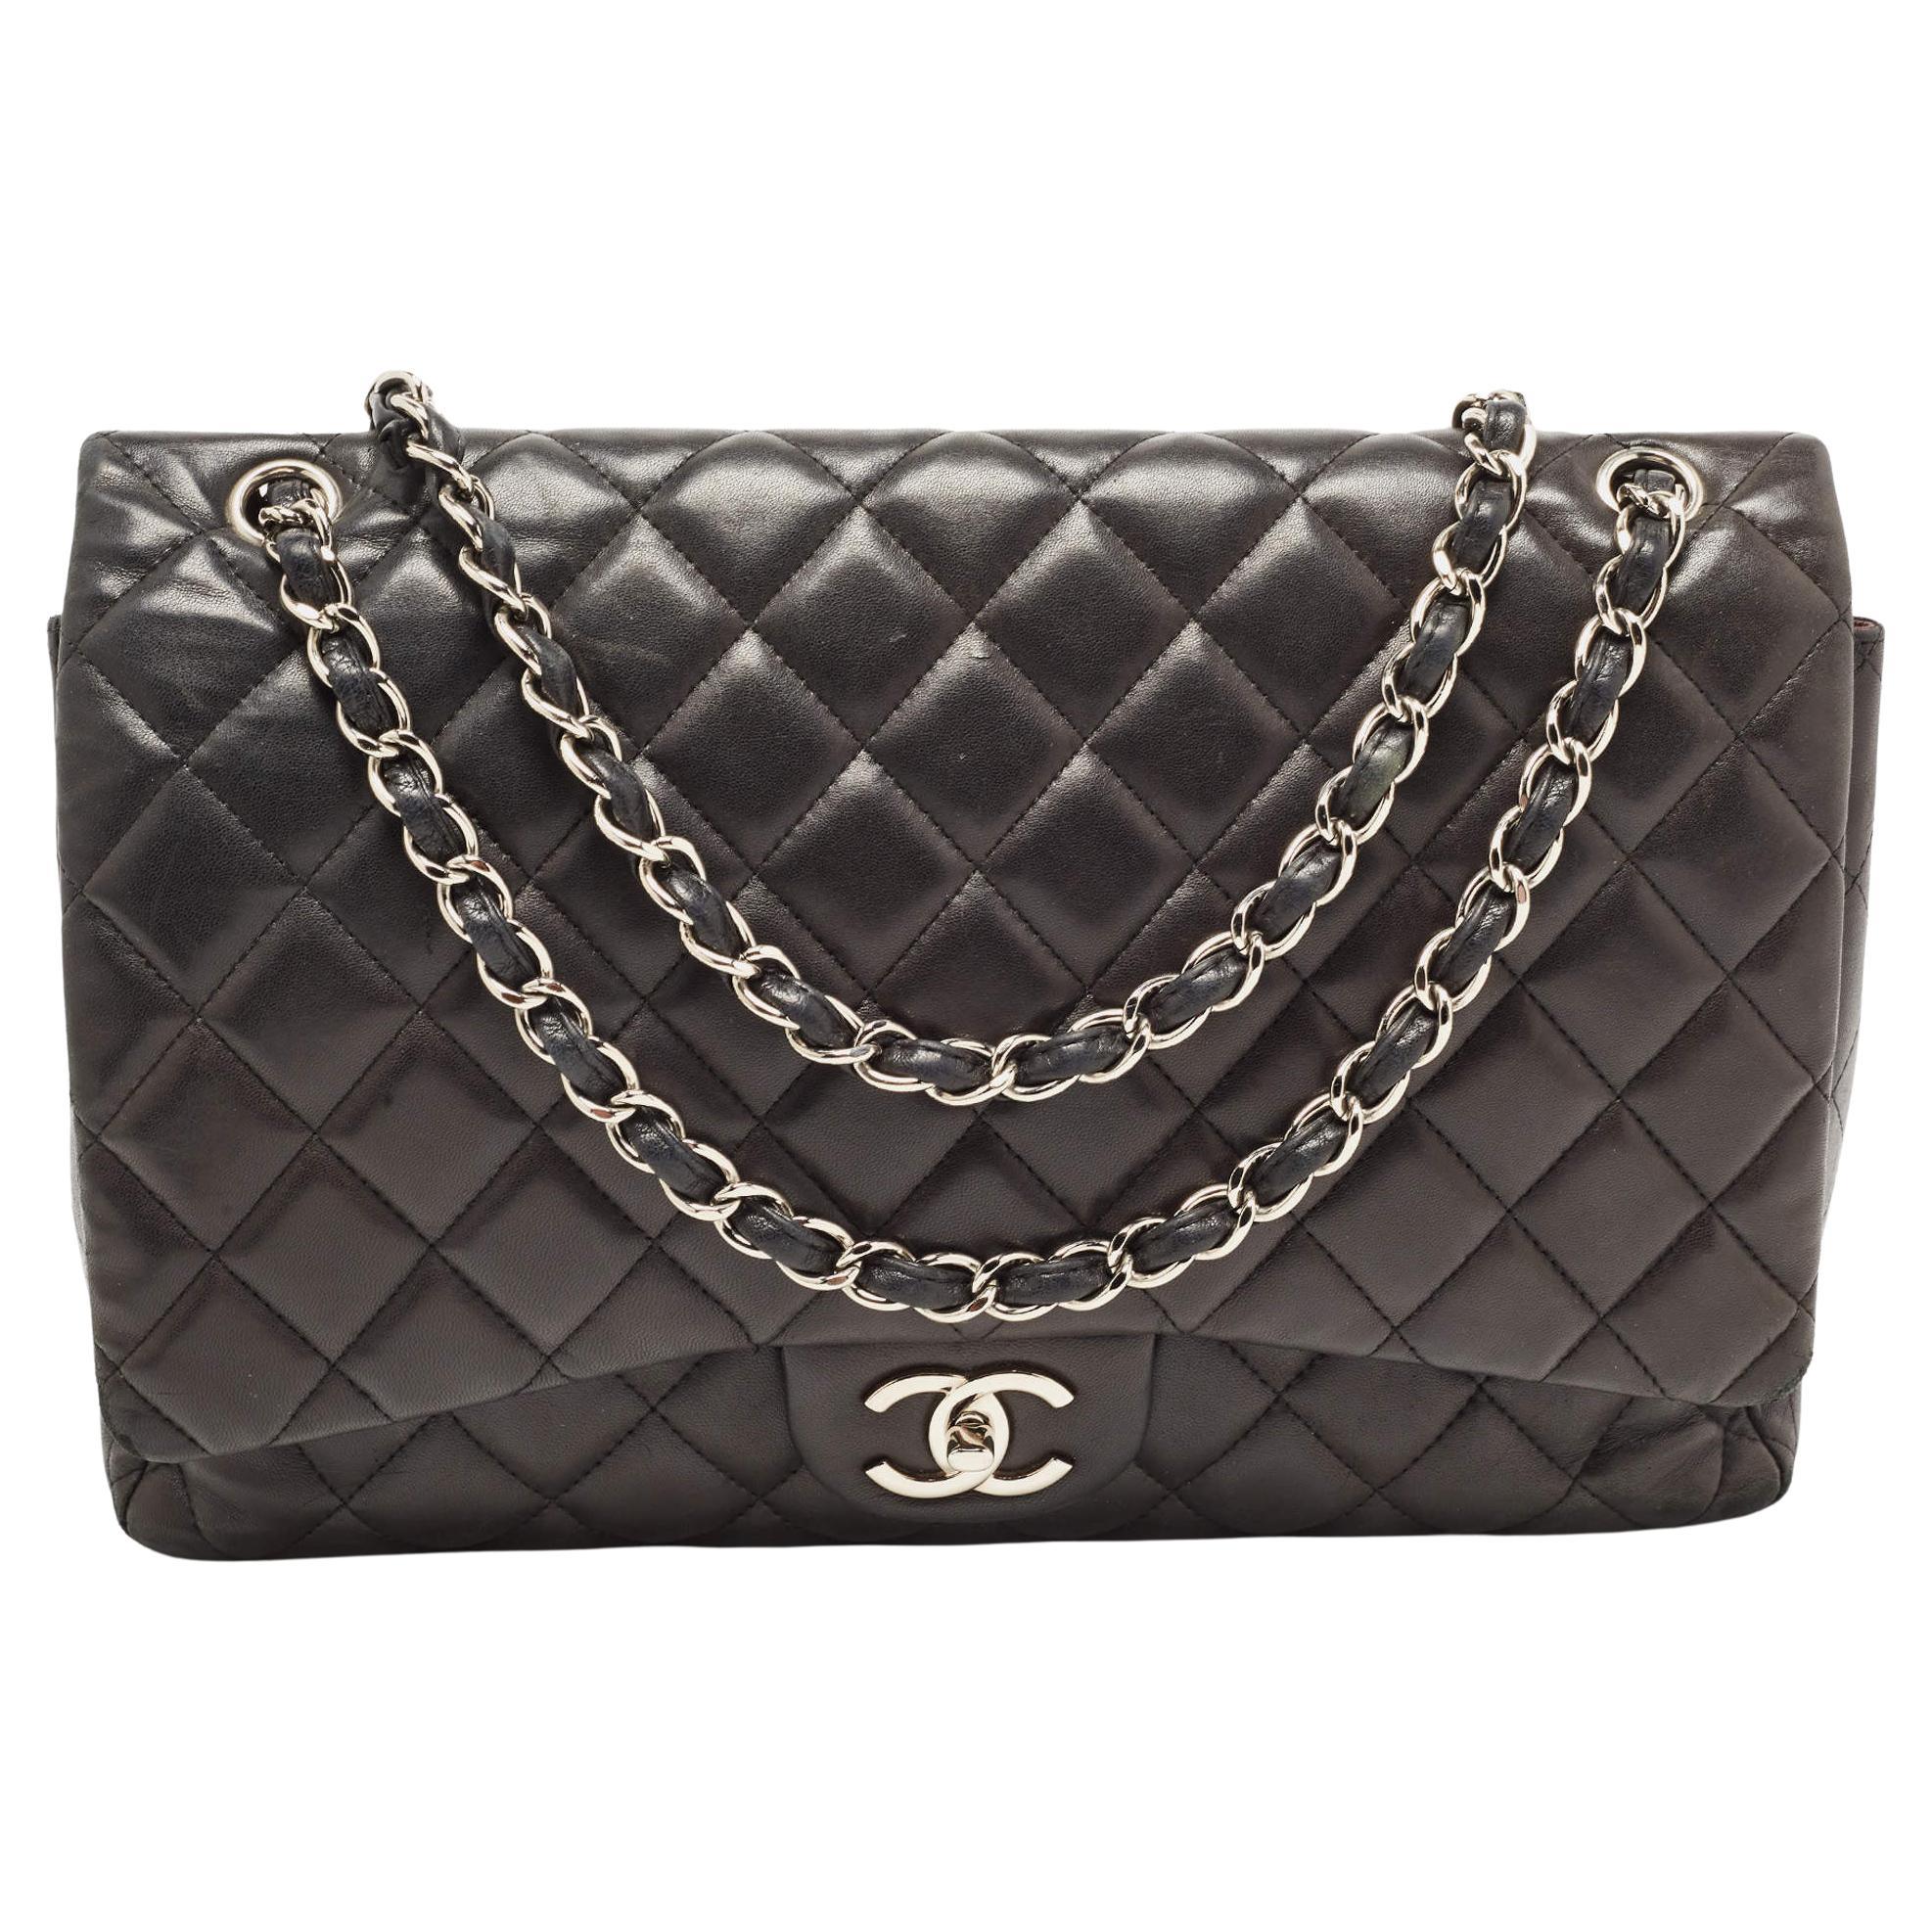 Chanel Black Quilted Wild Stitched Leather Medium Boy Bag